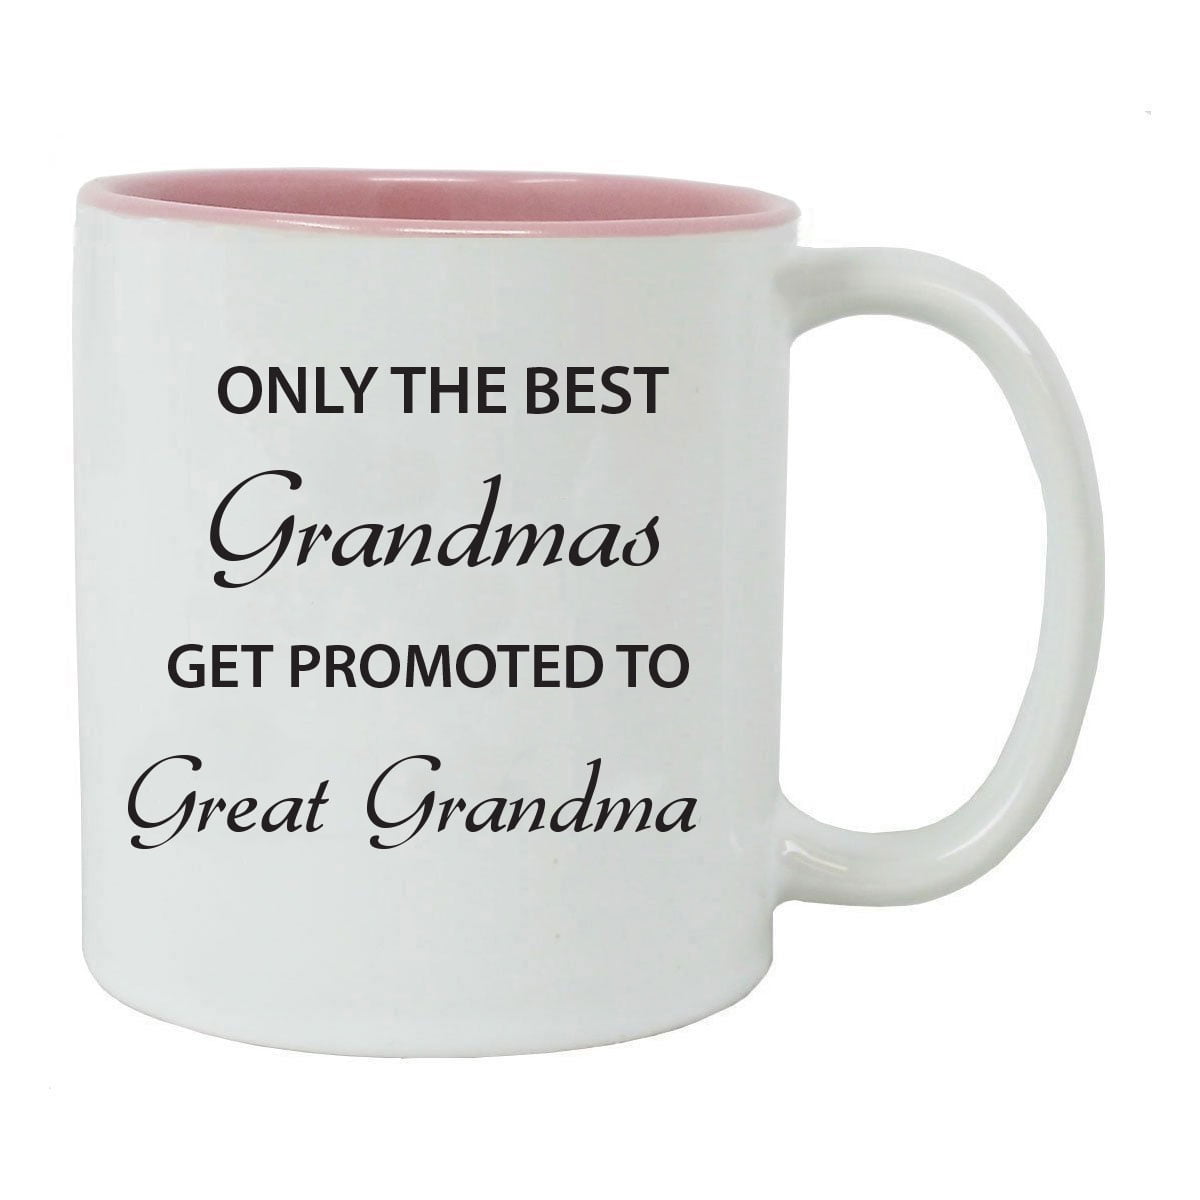 Only the Best Grandparents Get Promoted to Great Grandparents Coffee Mugs 